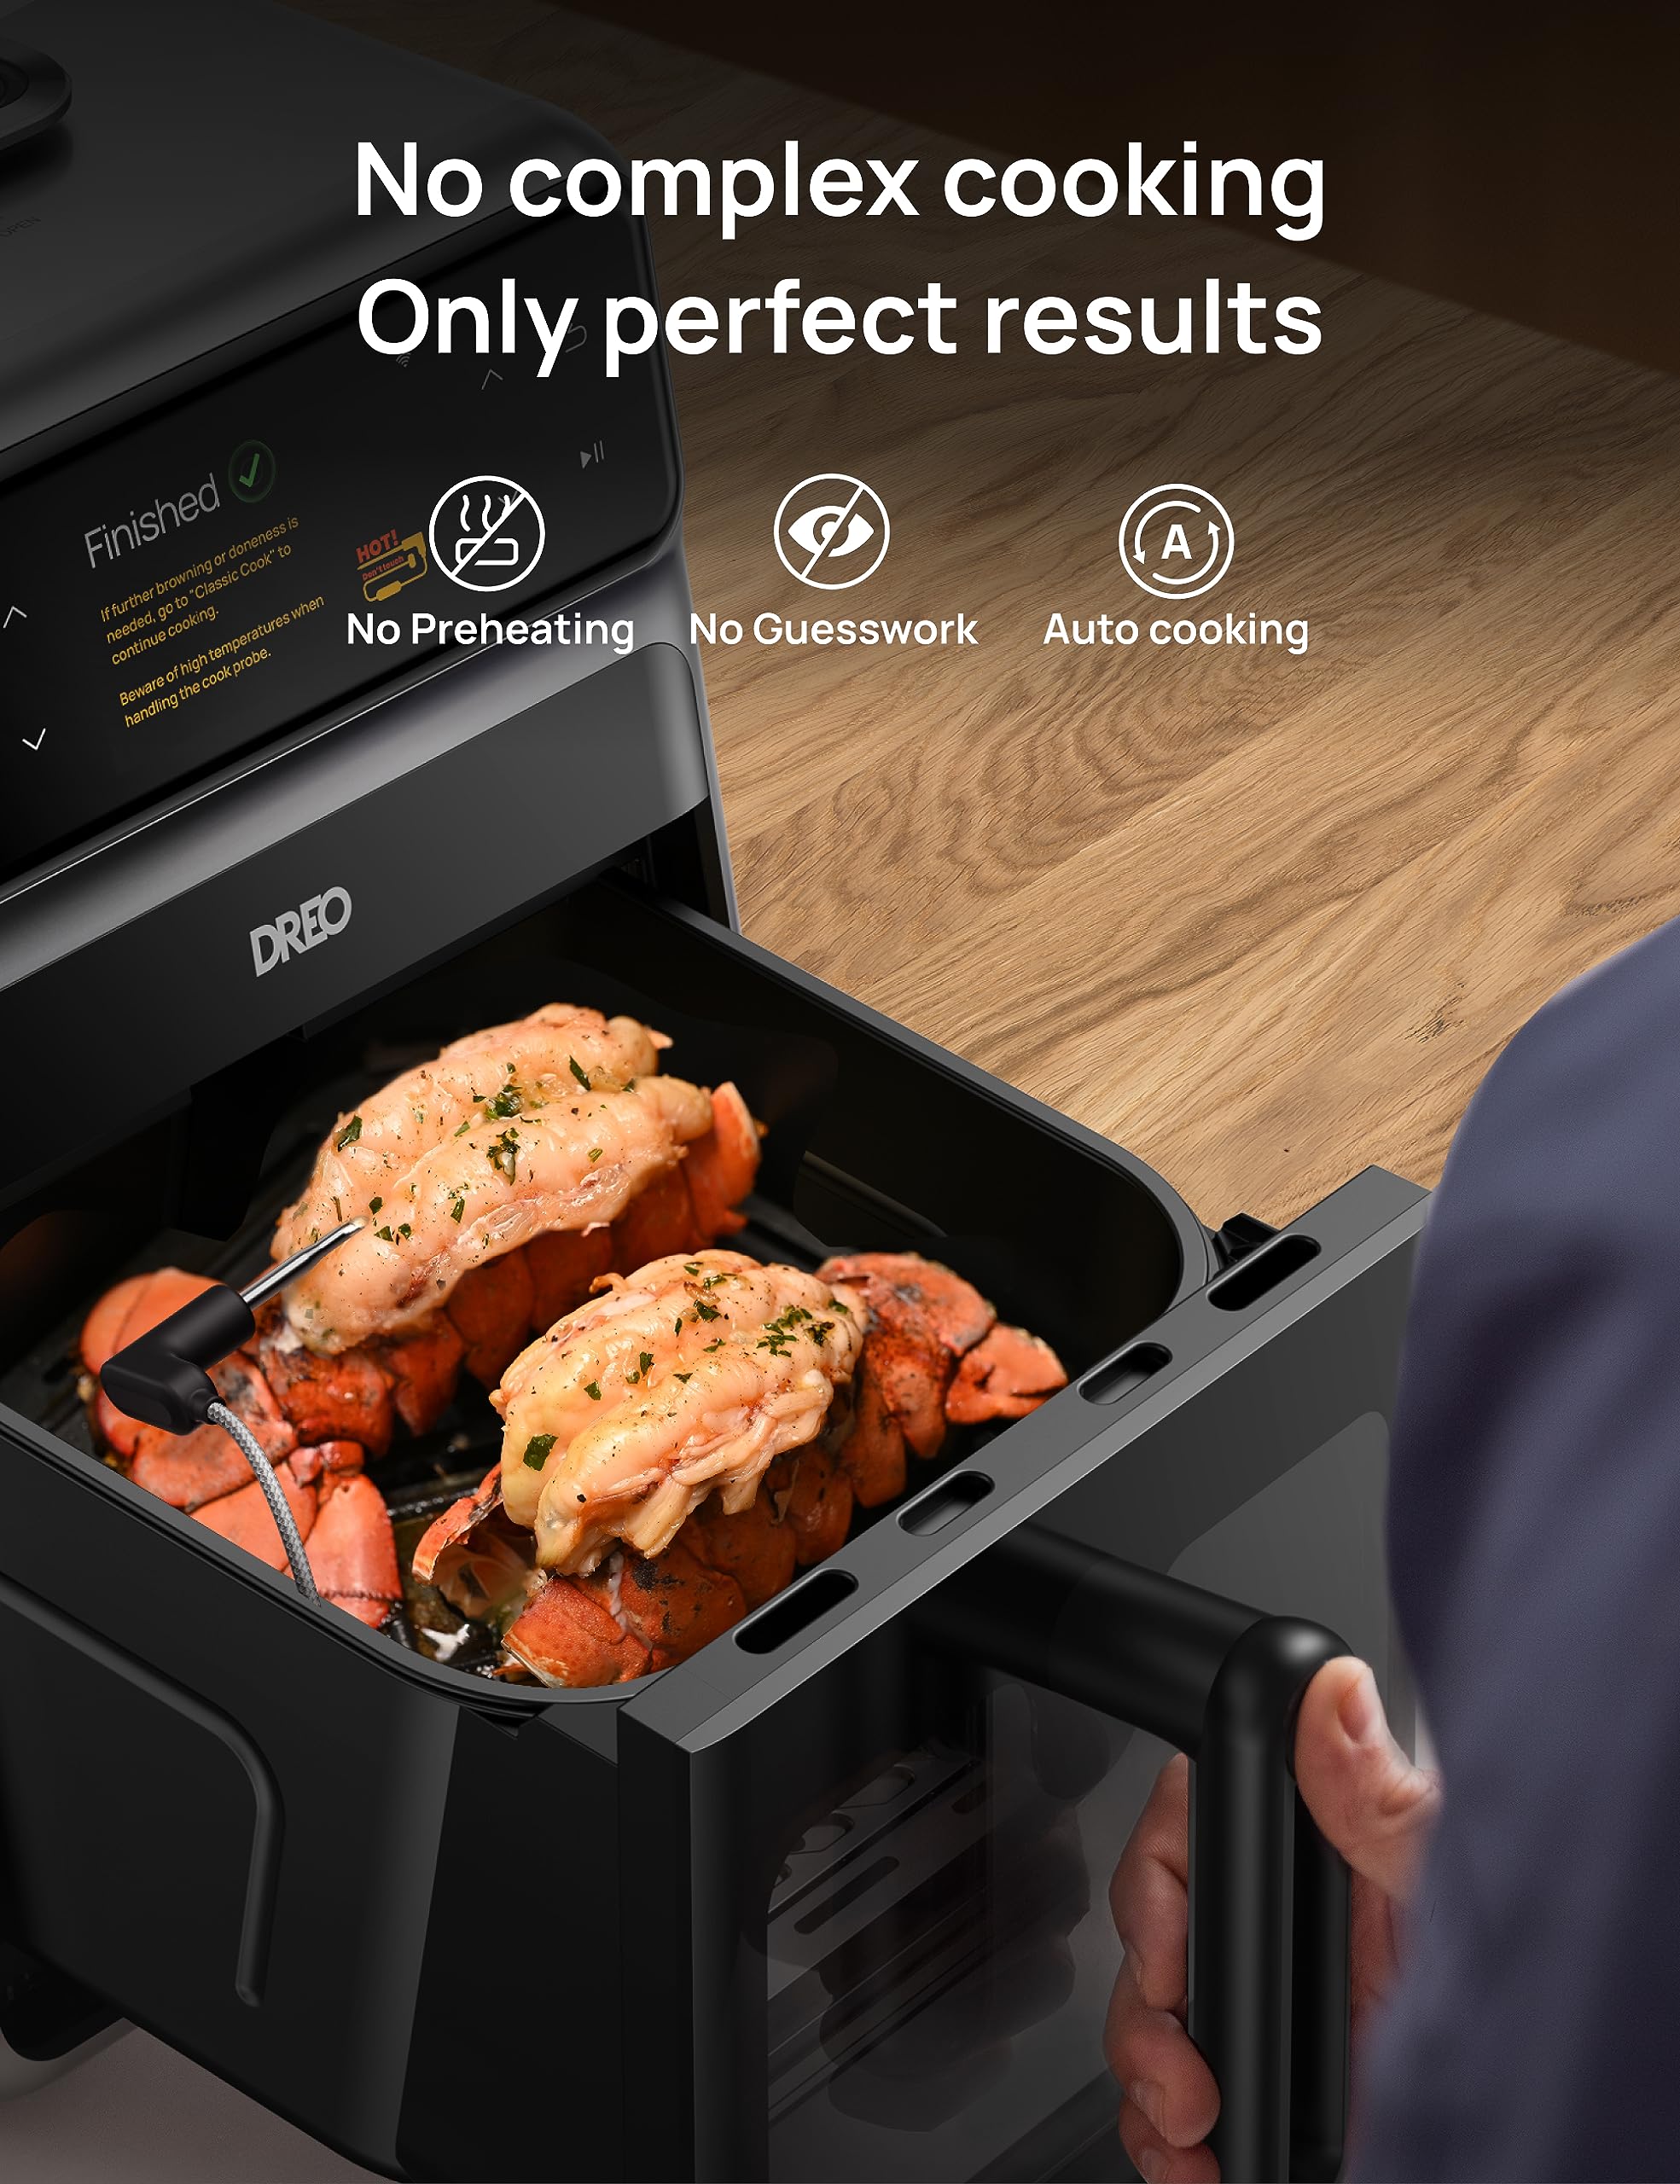 Dreo ChefMaker Combi Fryer, Cook like a pro with just the press of a button, Smart Cooker with Cook probe, Water Atomizer, 44+ Online Video Guides Recipes, 3 professional cooking modes, 6 QT